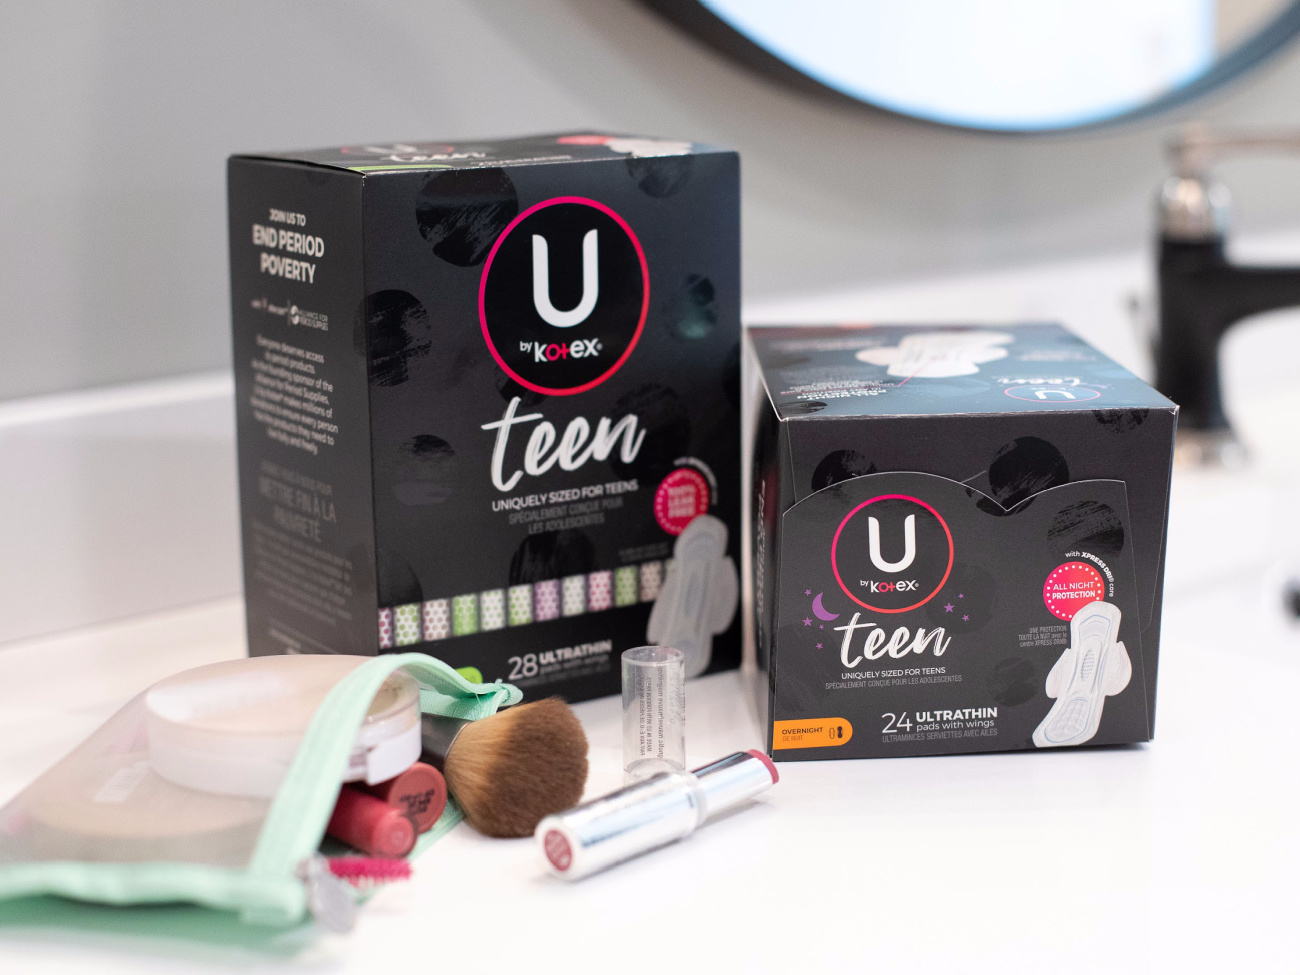 Pick Up Savings On U by Kotex Teen Pads This Week At Publix on I Heart Publix